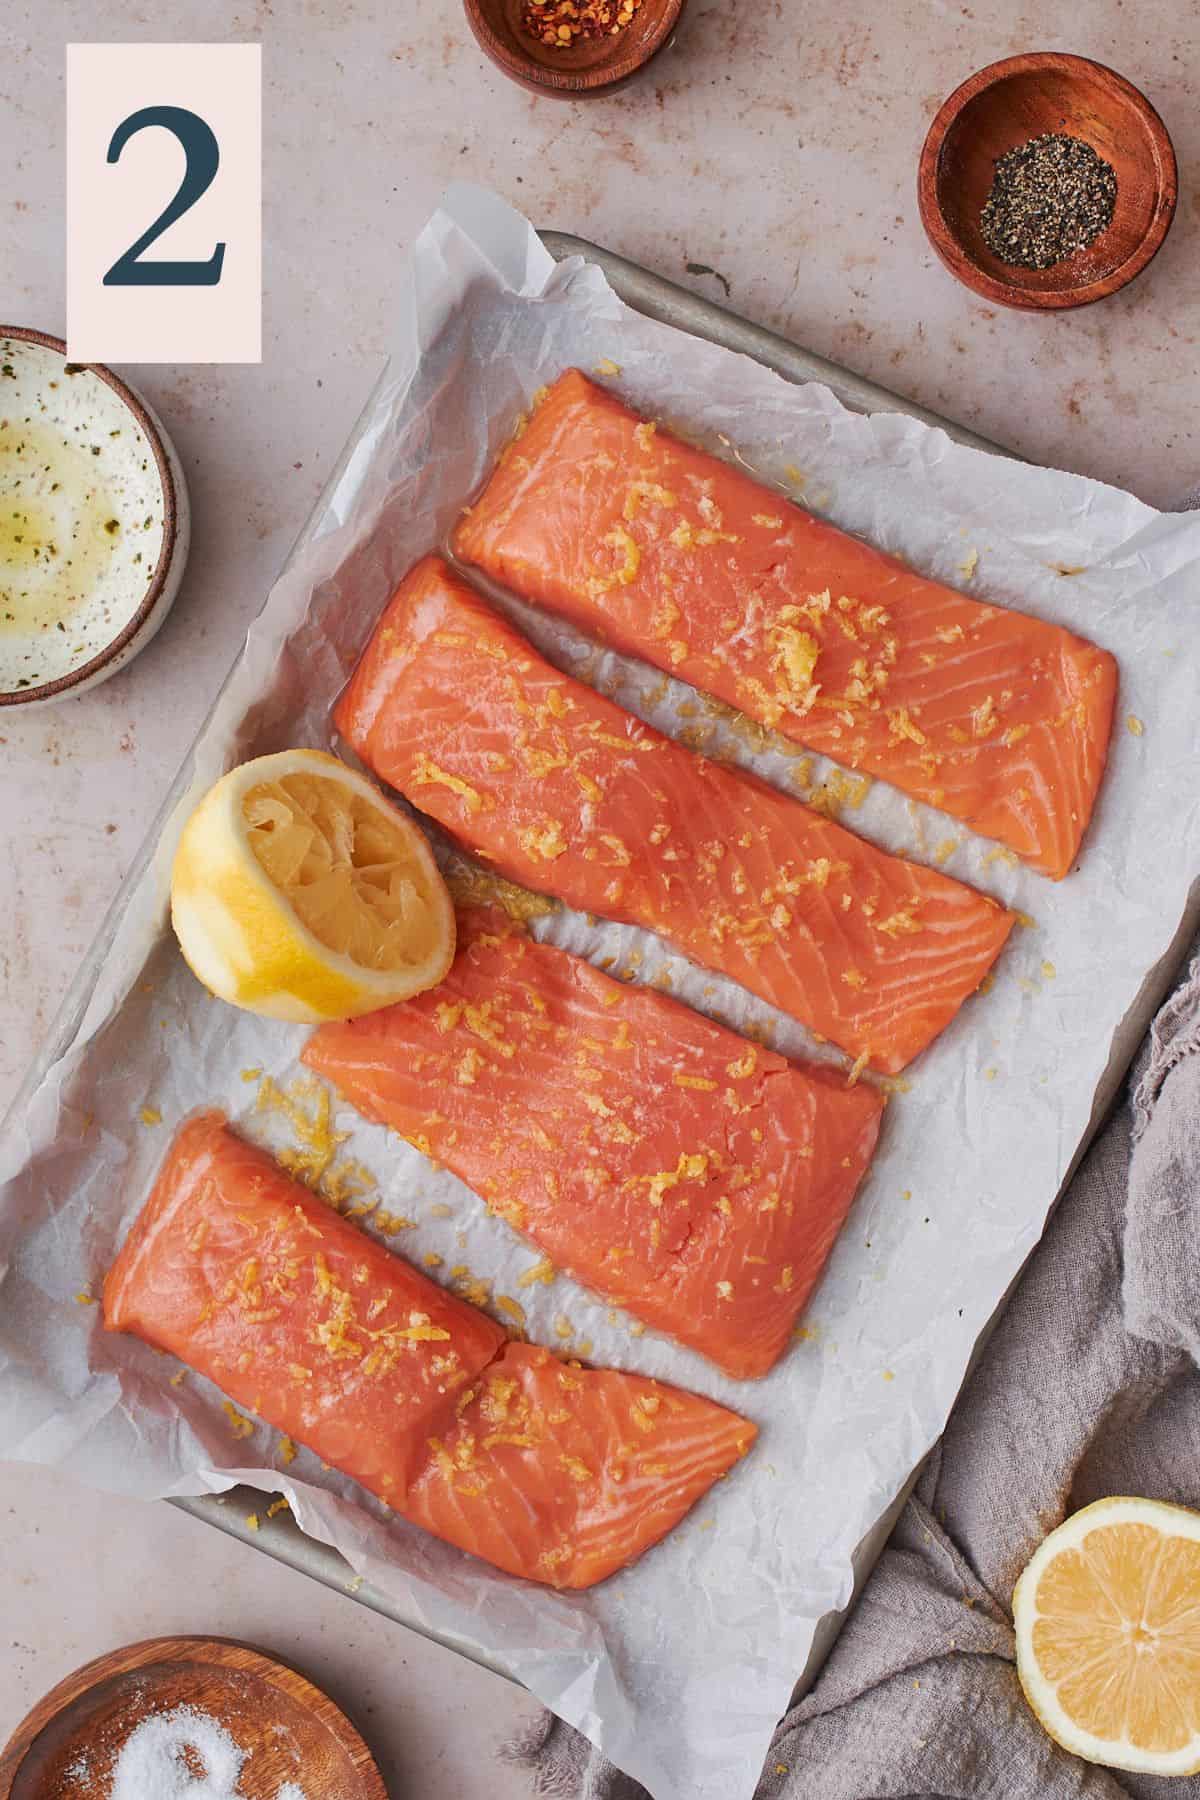 Salmon topped with lemon zest and juice.